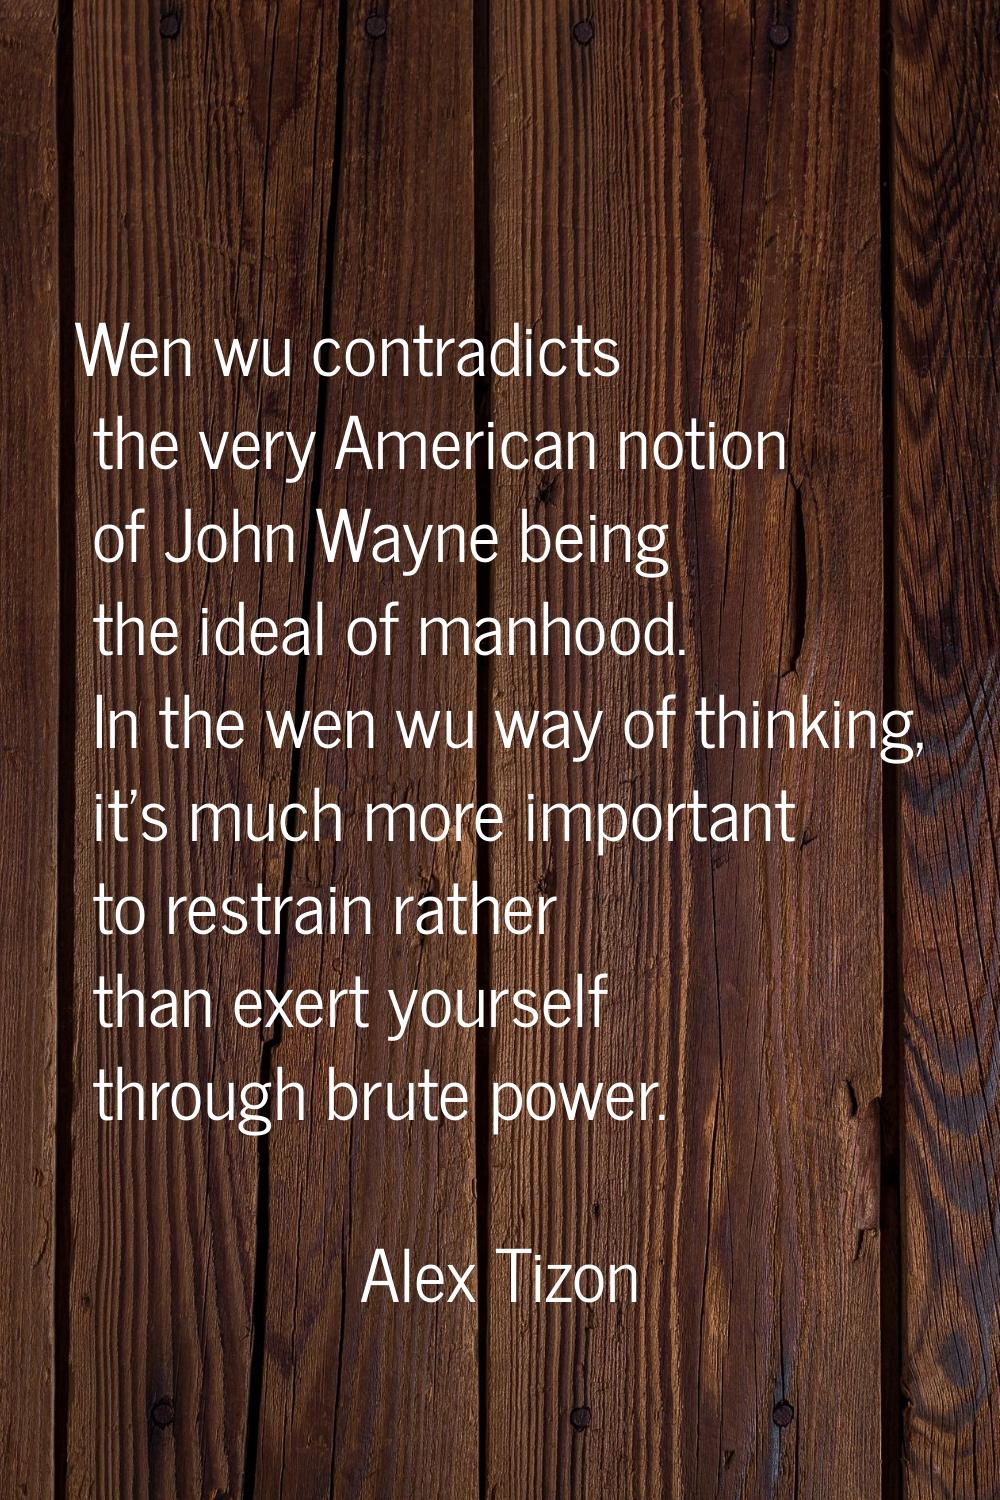 Wen wu contradicts the very American notion of John Wayne being the ideal of manhood. In the wen wu